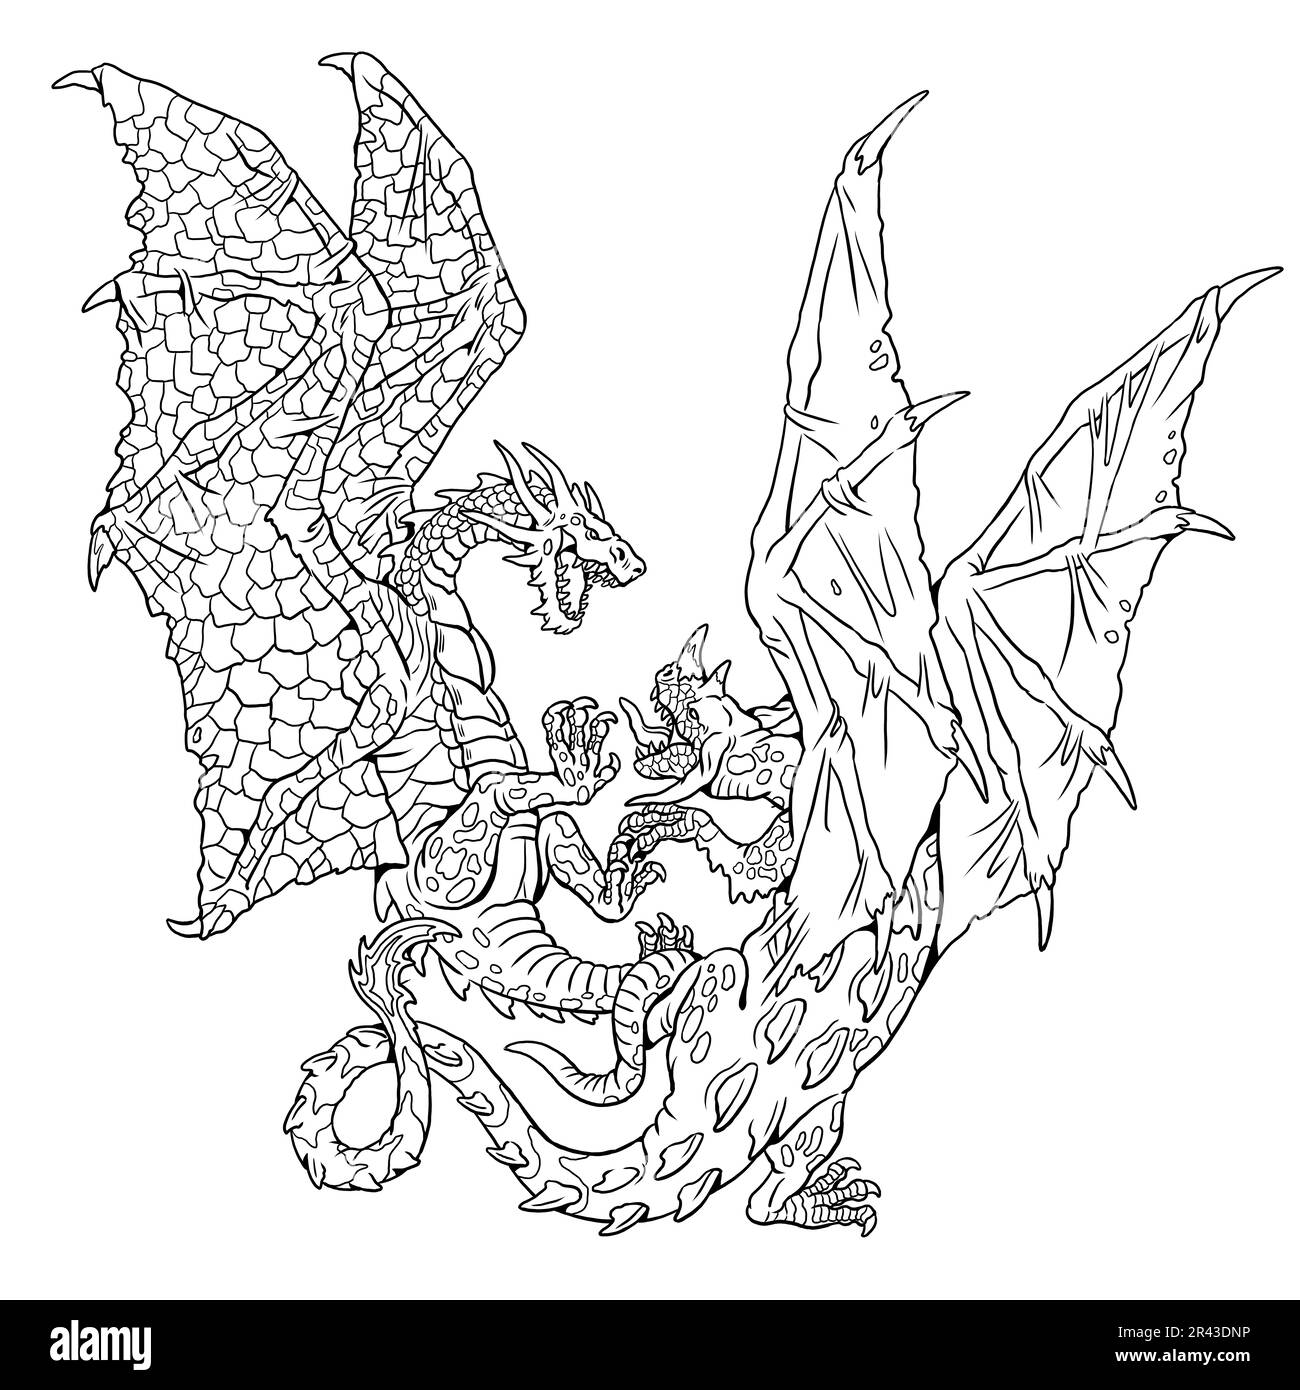 Dragons fight coloring page. Fantasy illustration with mythical creature. Monster dragon coloring sheet. Stock Photo